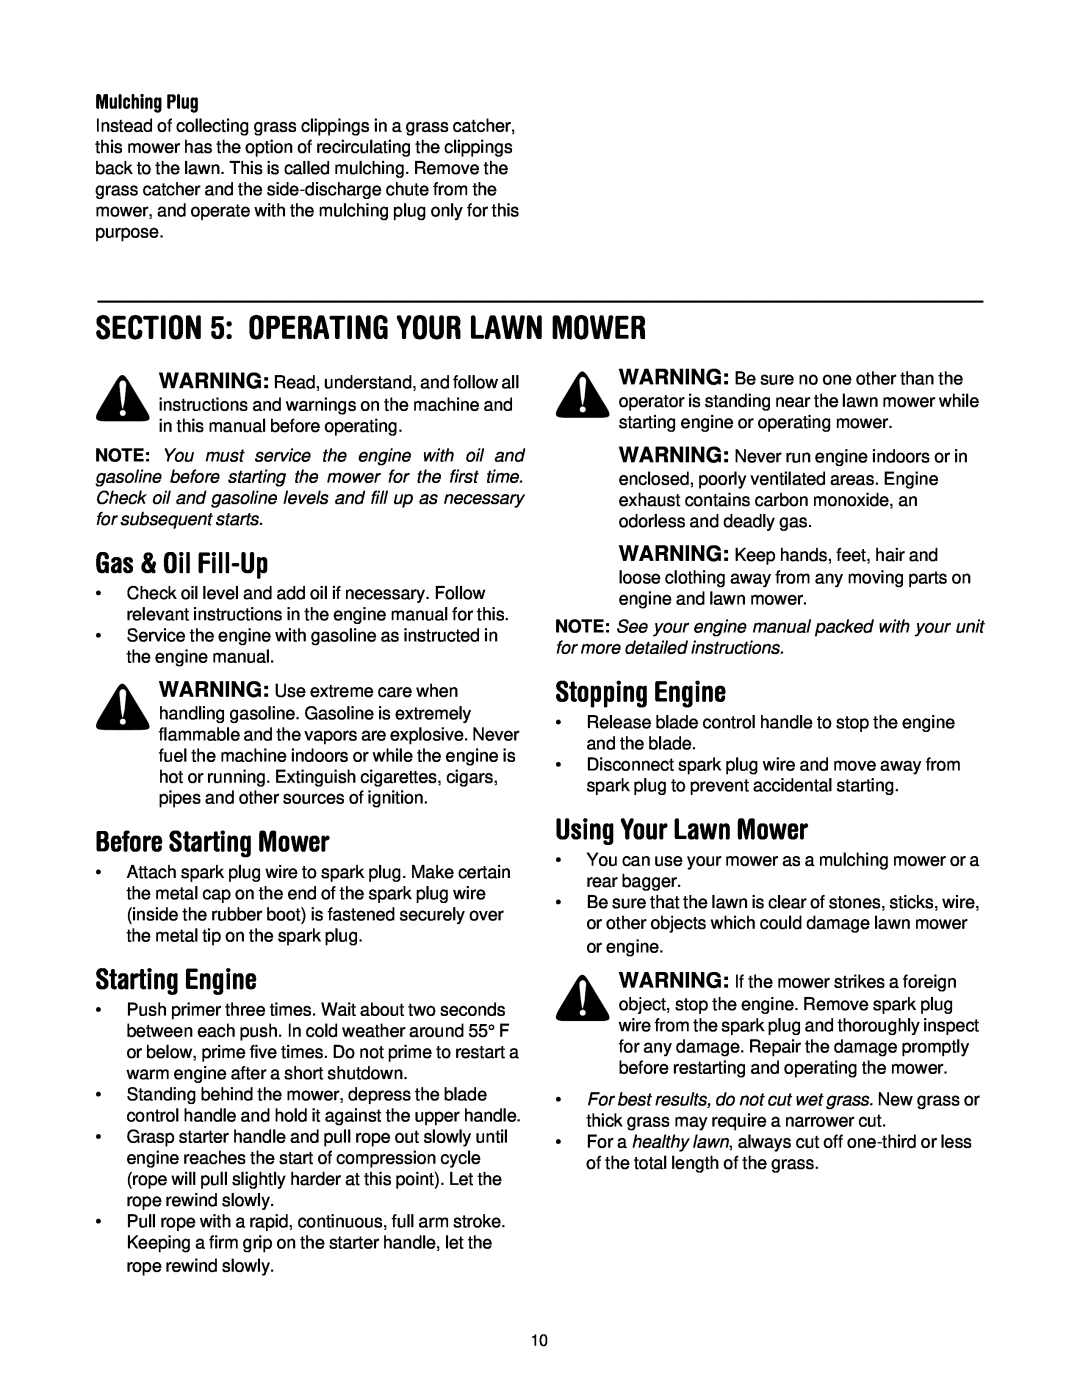 Bolens 546 manual Operating Your Lawn Mower, Gas & Oil Fill-Up, Stopping Engine, Before Starting Mower, Starting Engine 